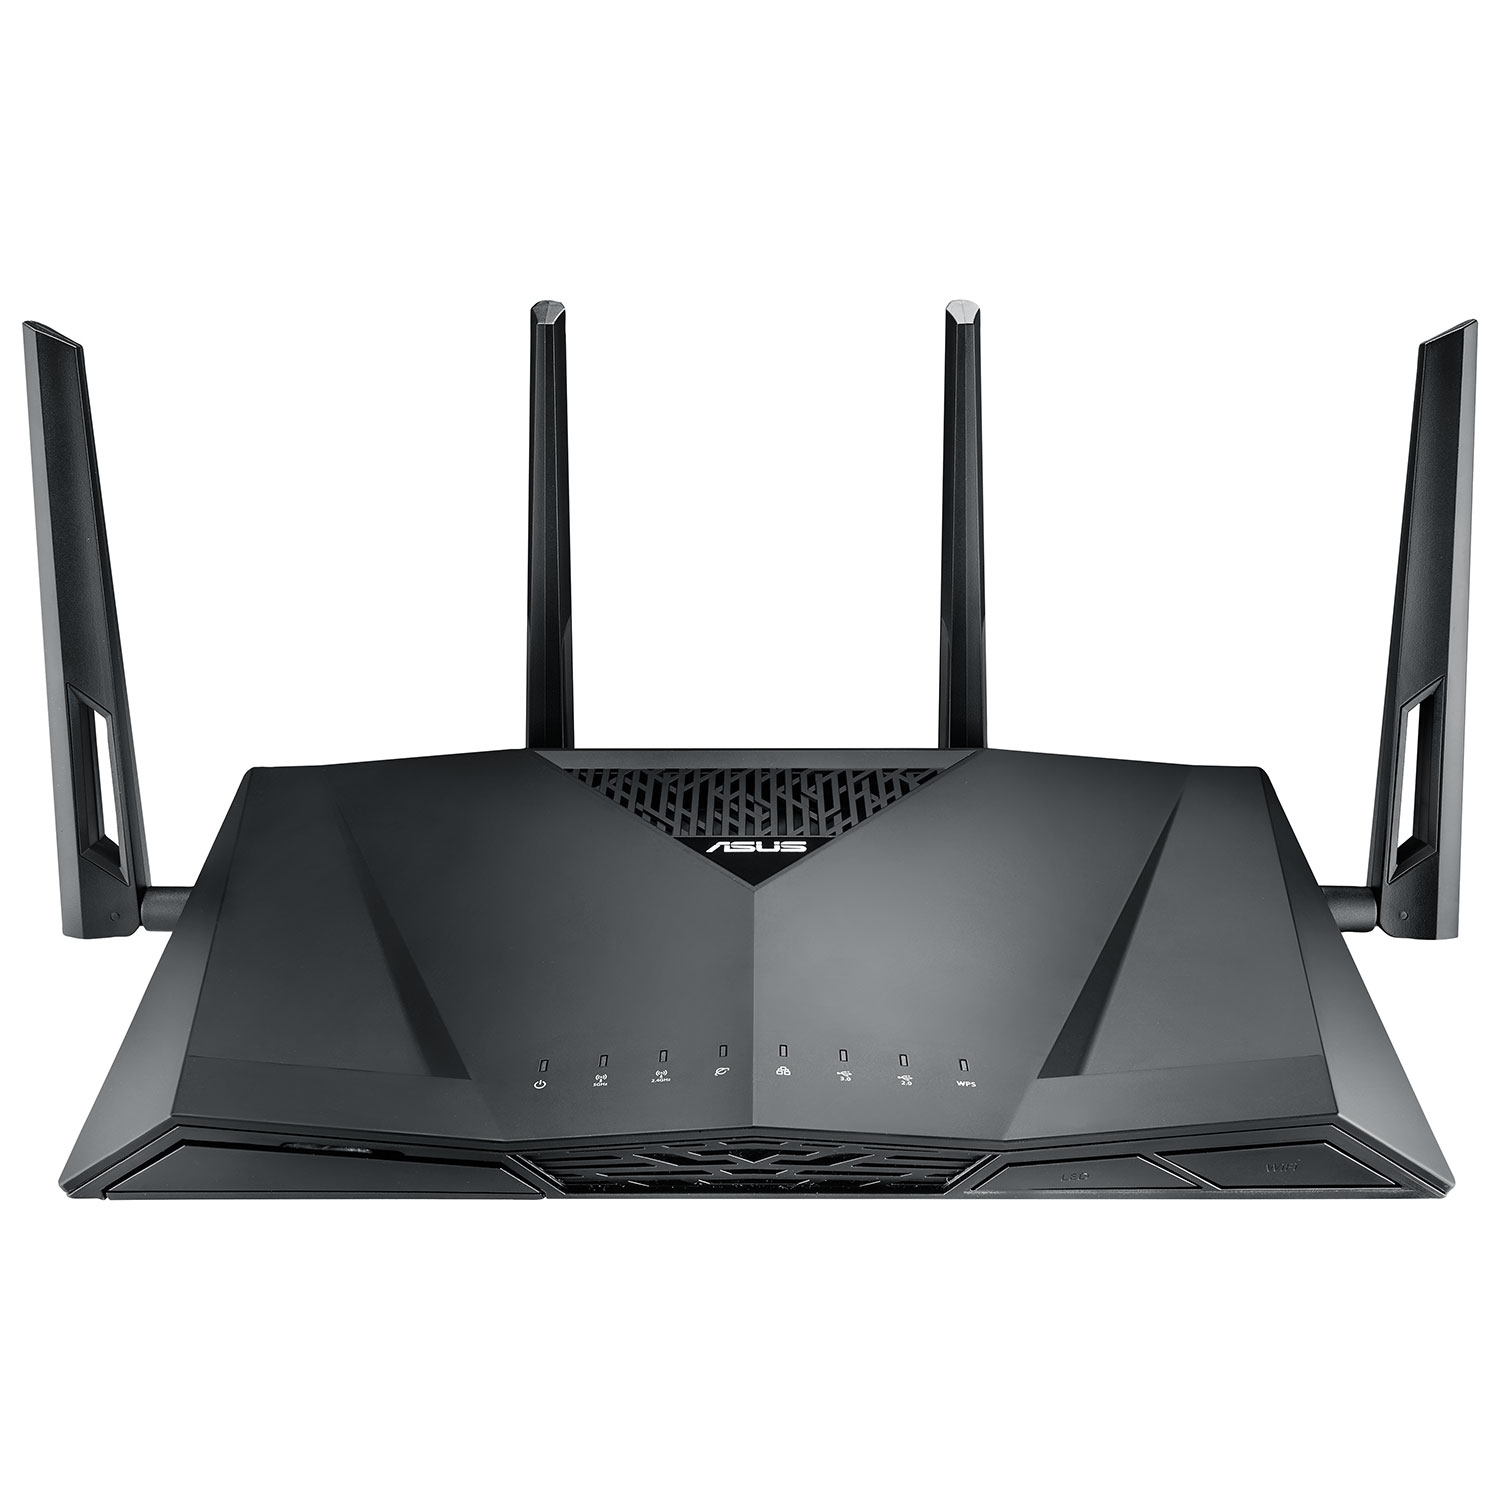 wireless routers: single, dual, & tri-band - best buy canada